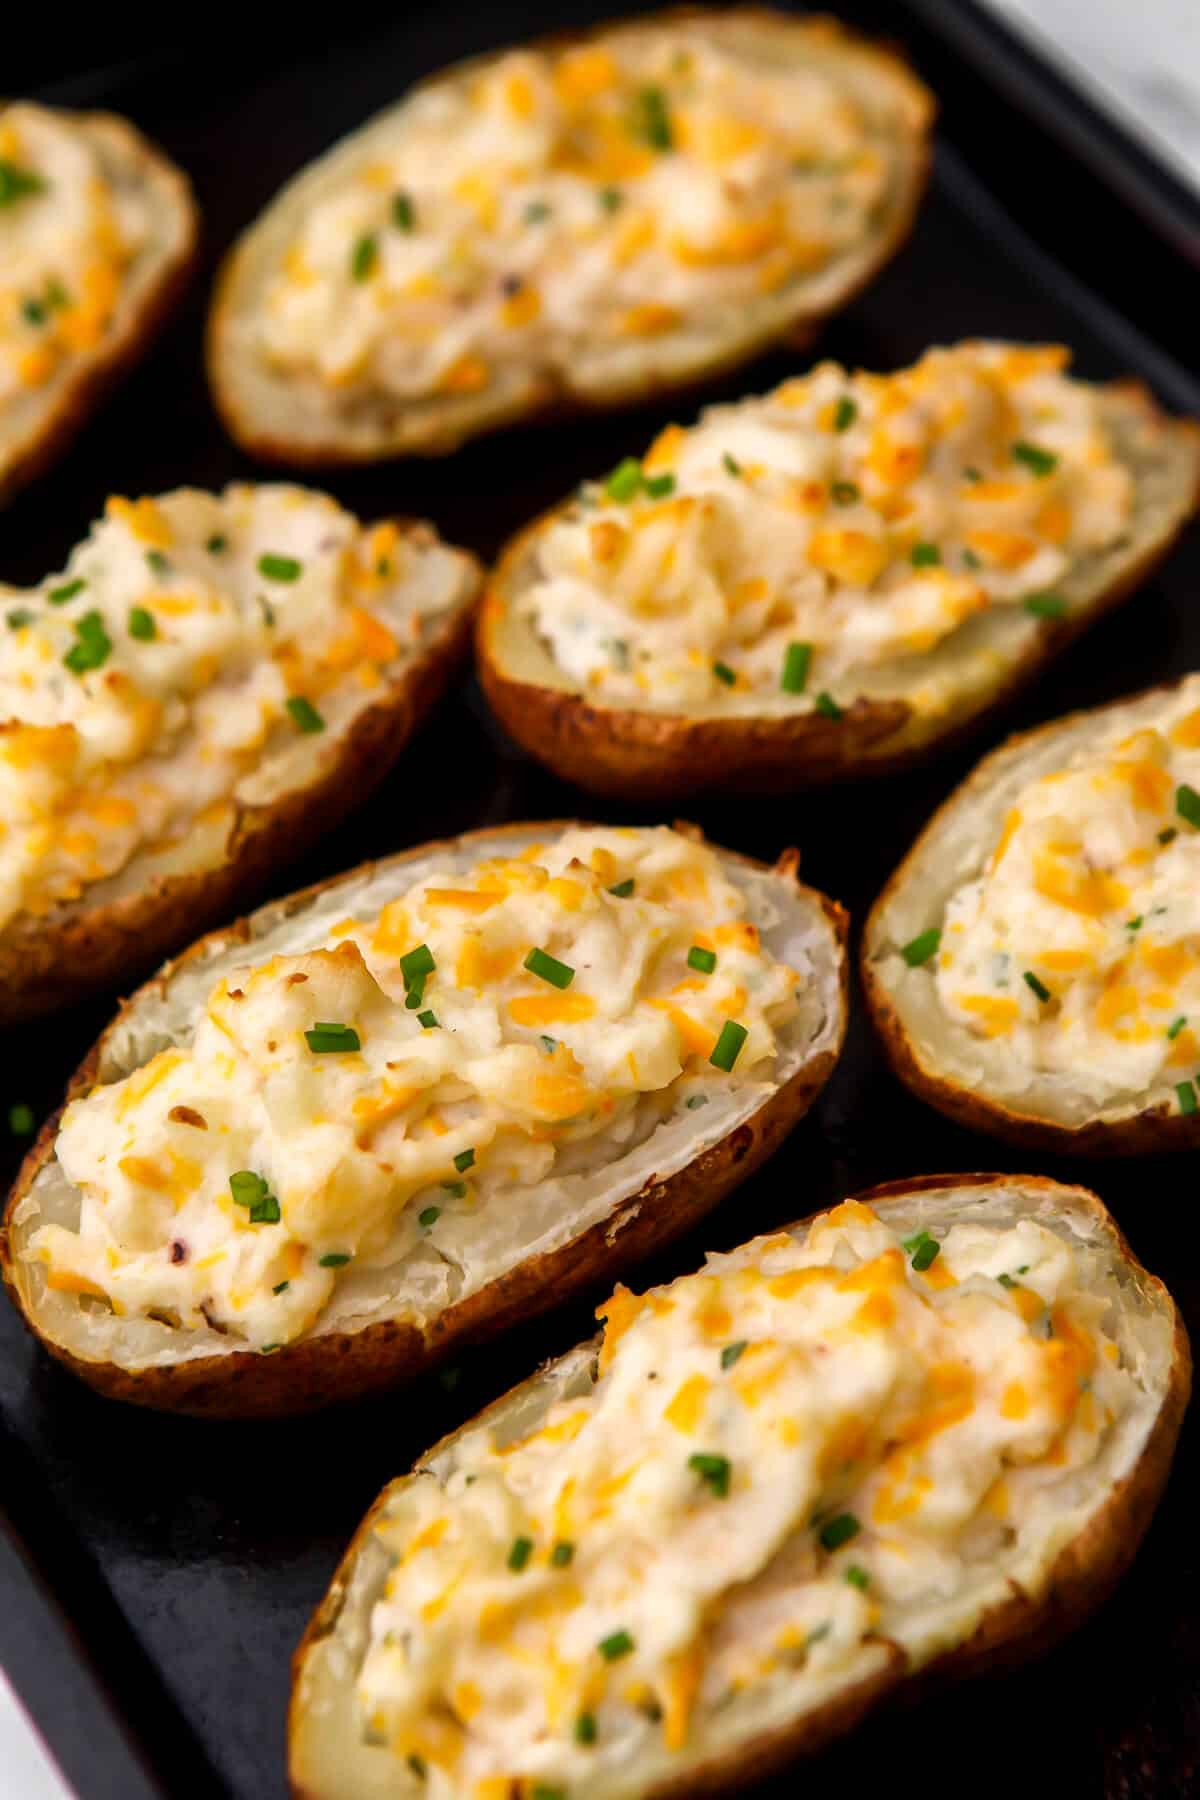 Vegan twice baked potatoes after they have been baked a second time.